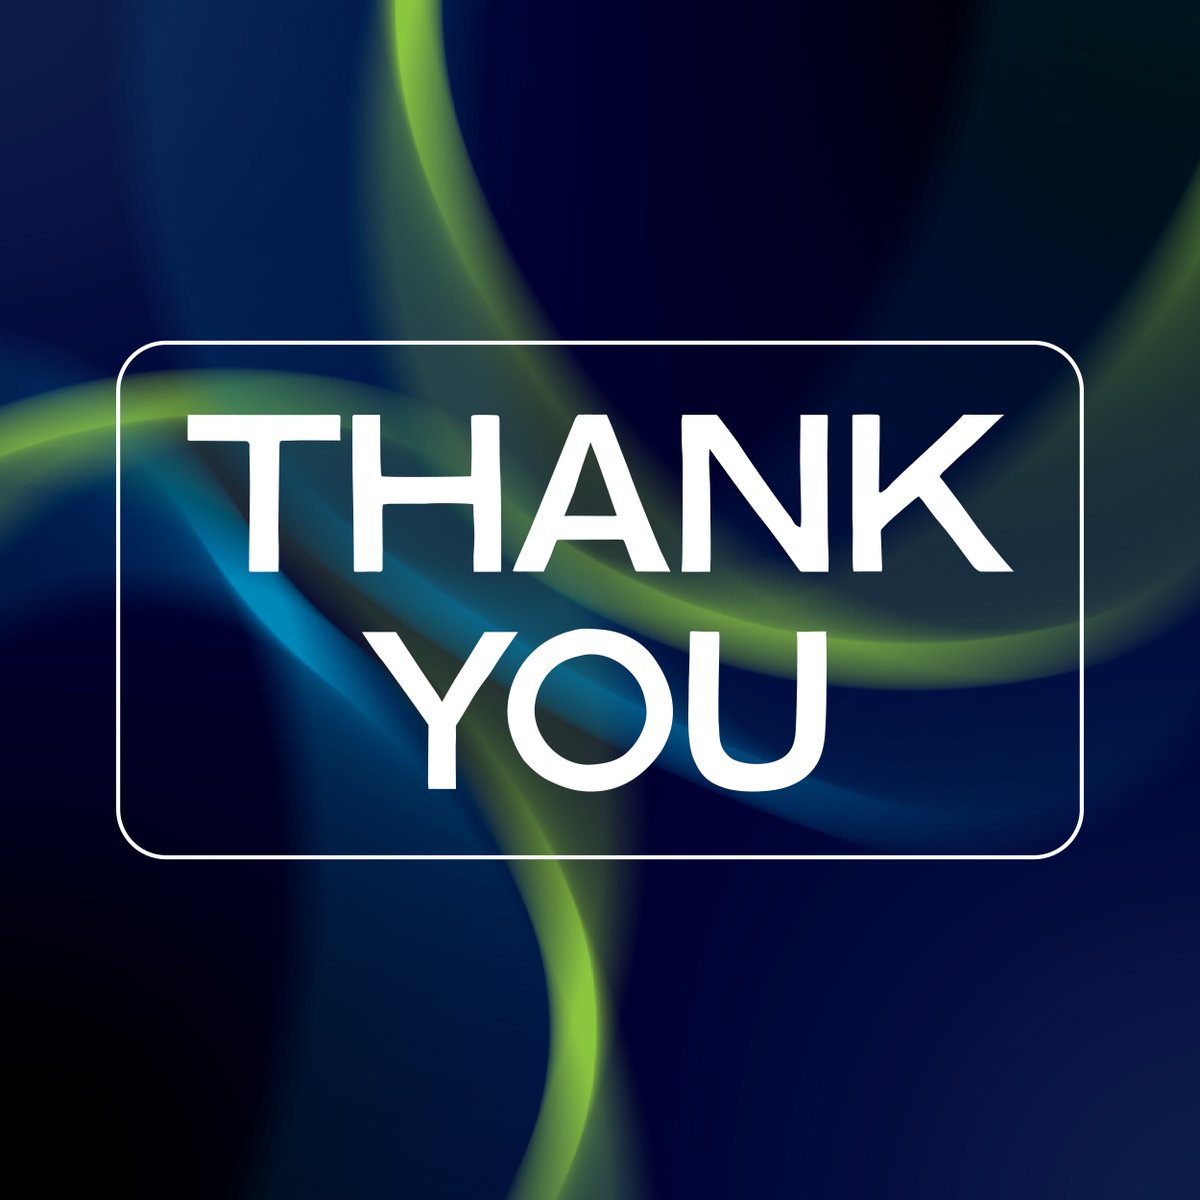 With #CIFF48 and #CIFF48Streams, Presented by @PNCbank, officially in the books, we want to give a heartfelt thank you to each and every one of you who watched films, donated to our Challenge Match, purchased merchandise, and volunteered! You all are something else.